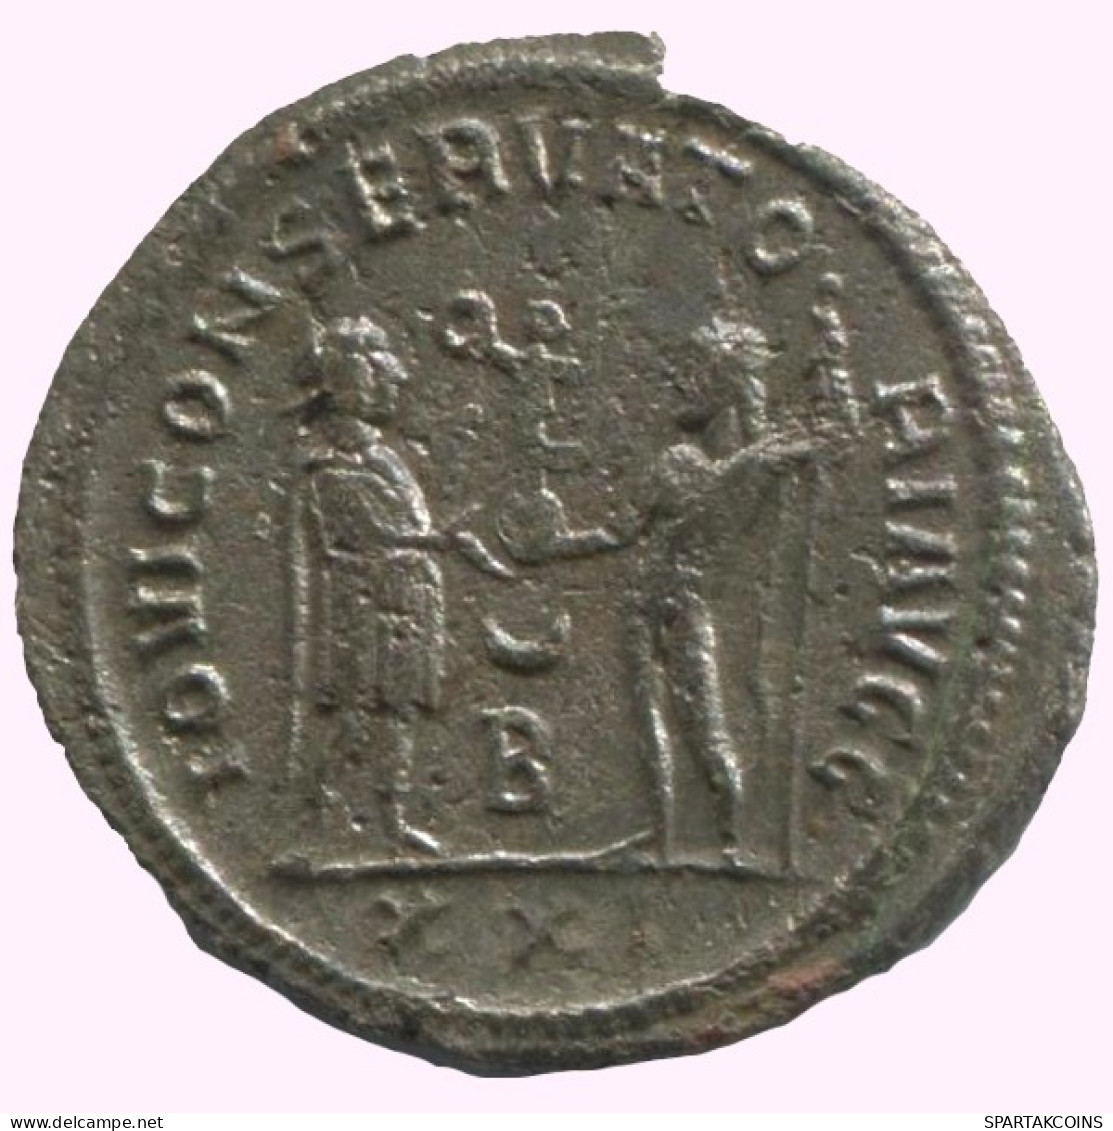 DIOCLETIAN ANTONINIANUS Antioch (? B/XXI) AD293 IOVI CONSERVAT AVGG #ANT1927..E.A - The Tetrarchy (284 AD To 307 AD)